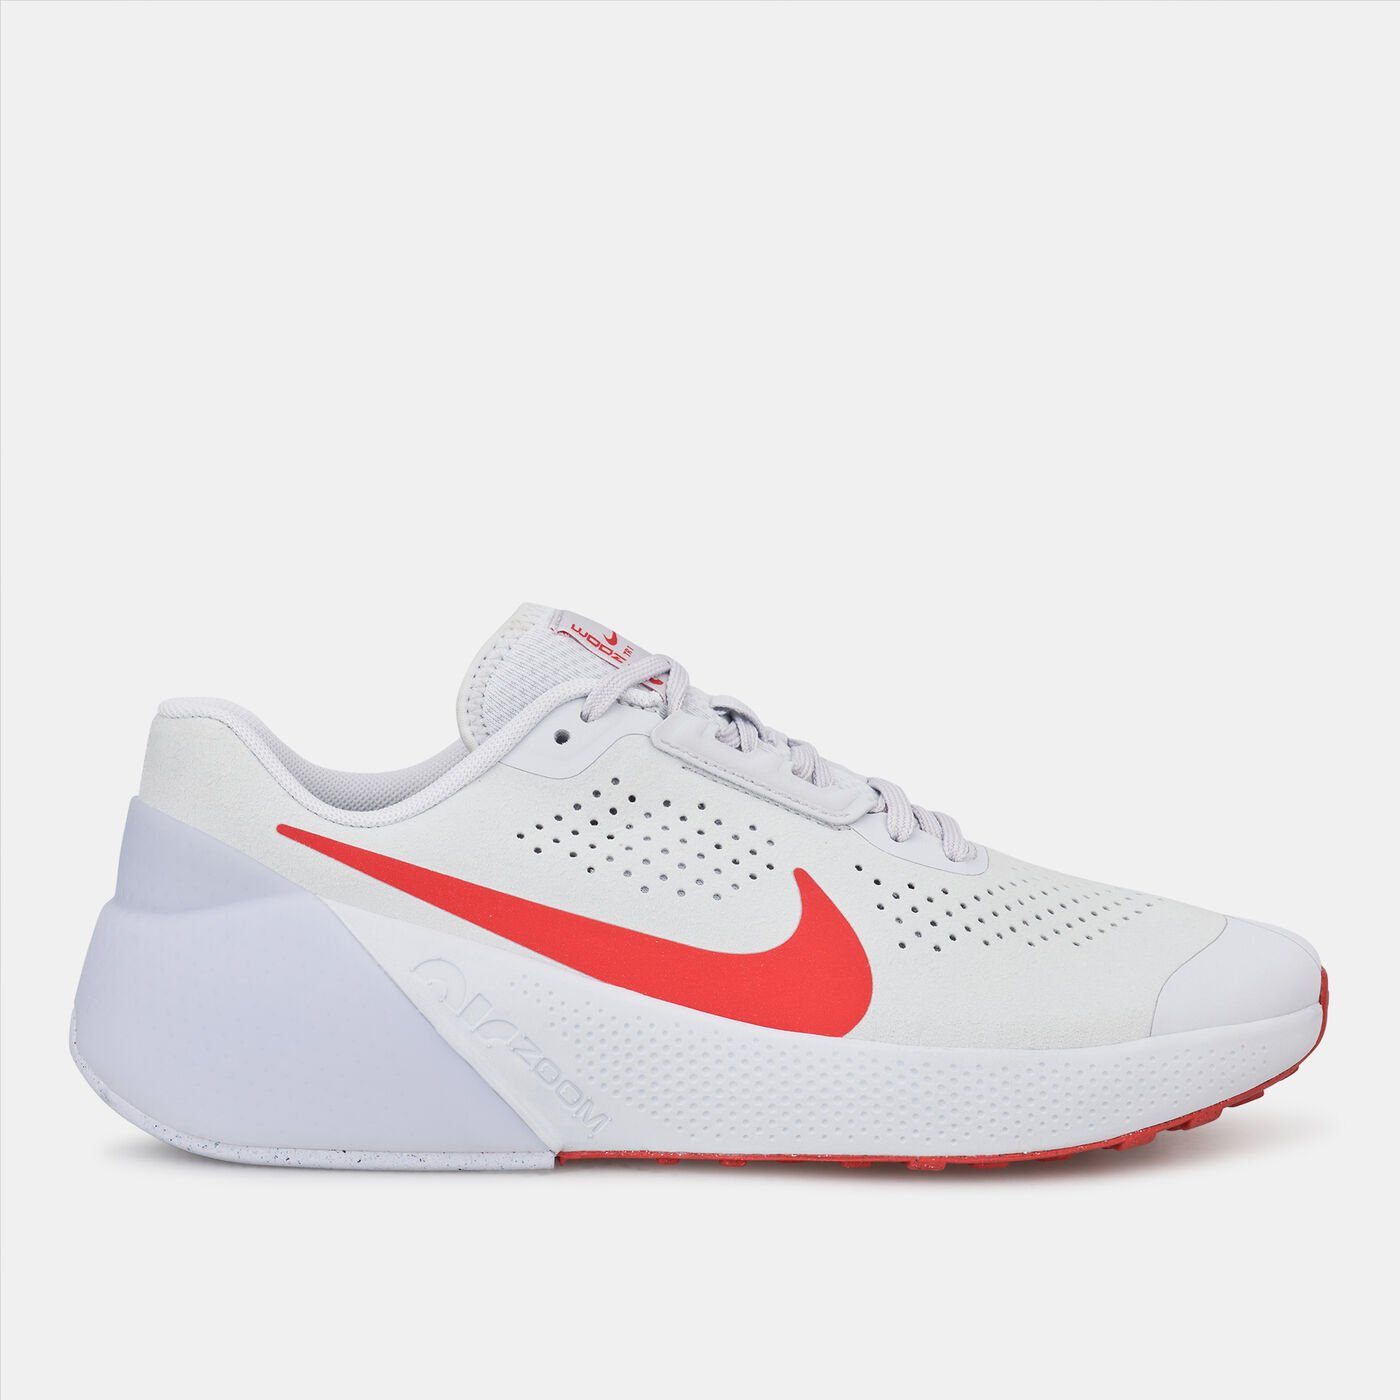 Men's Air Zoom TR 1 Training Shoes